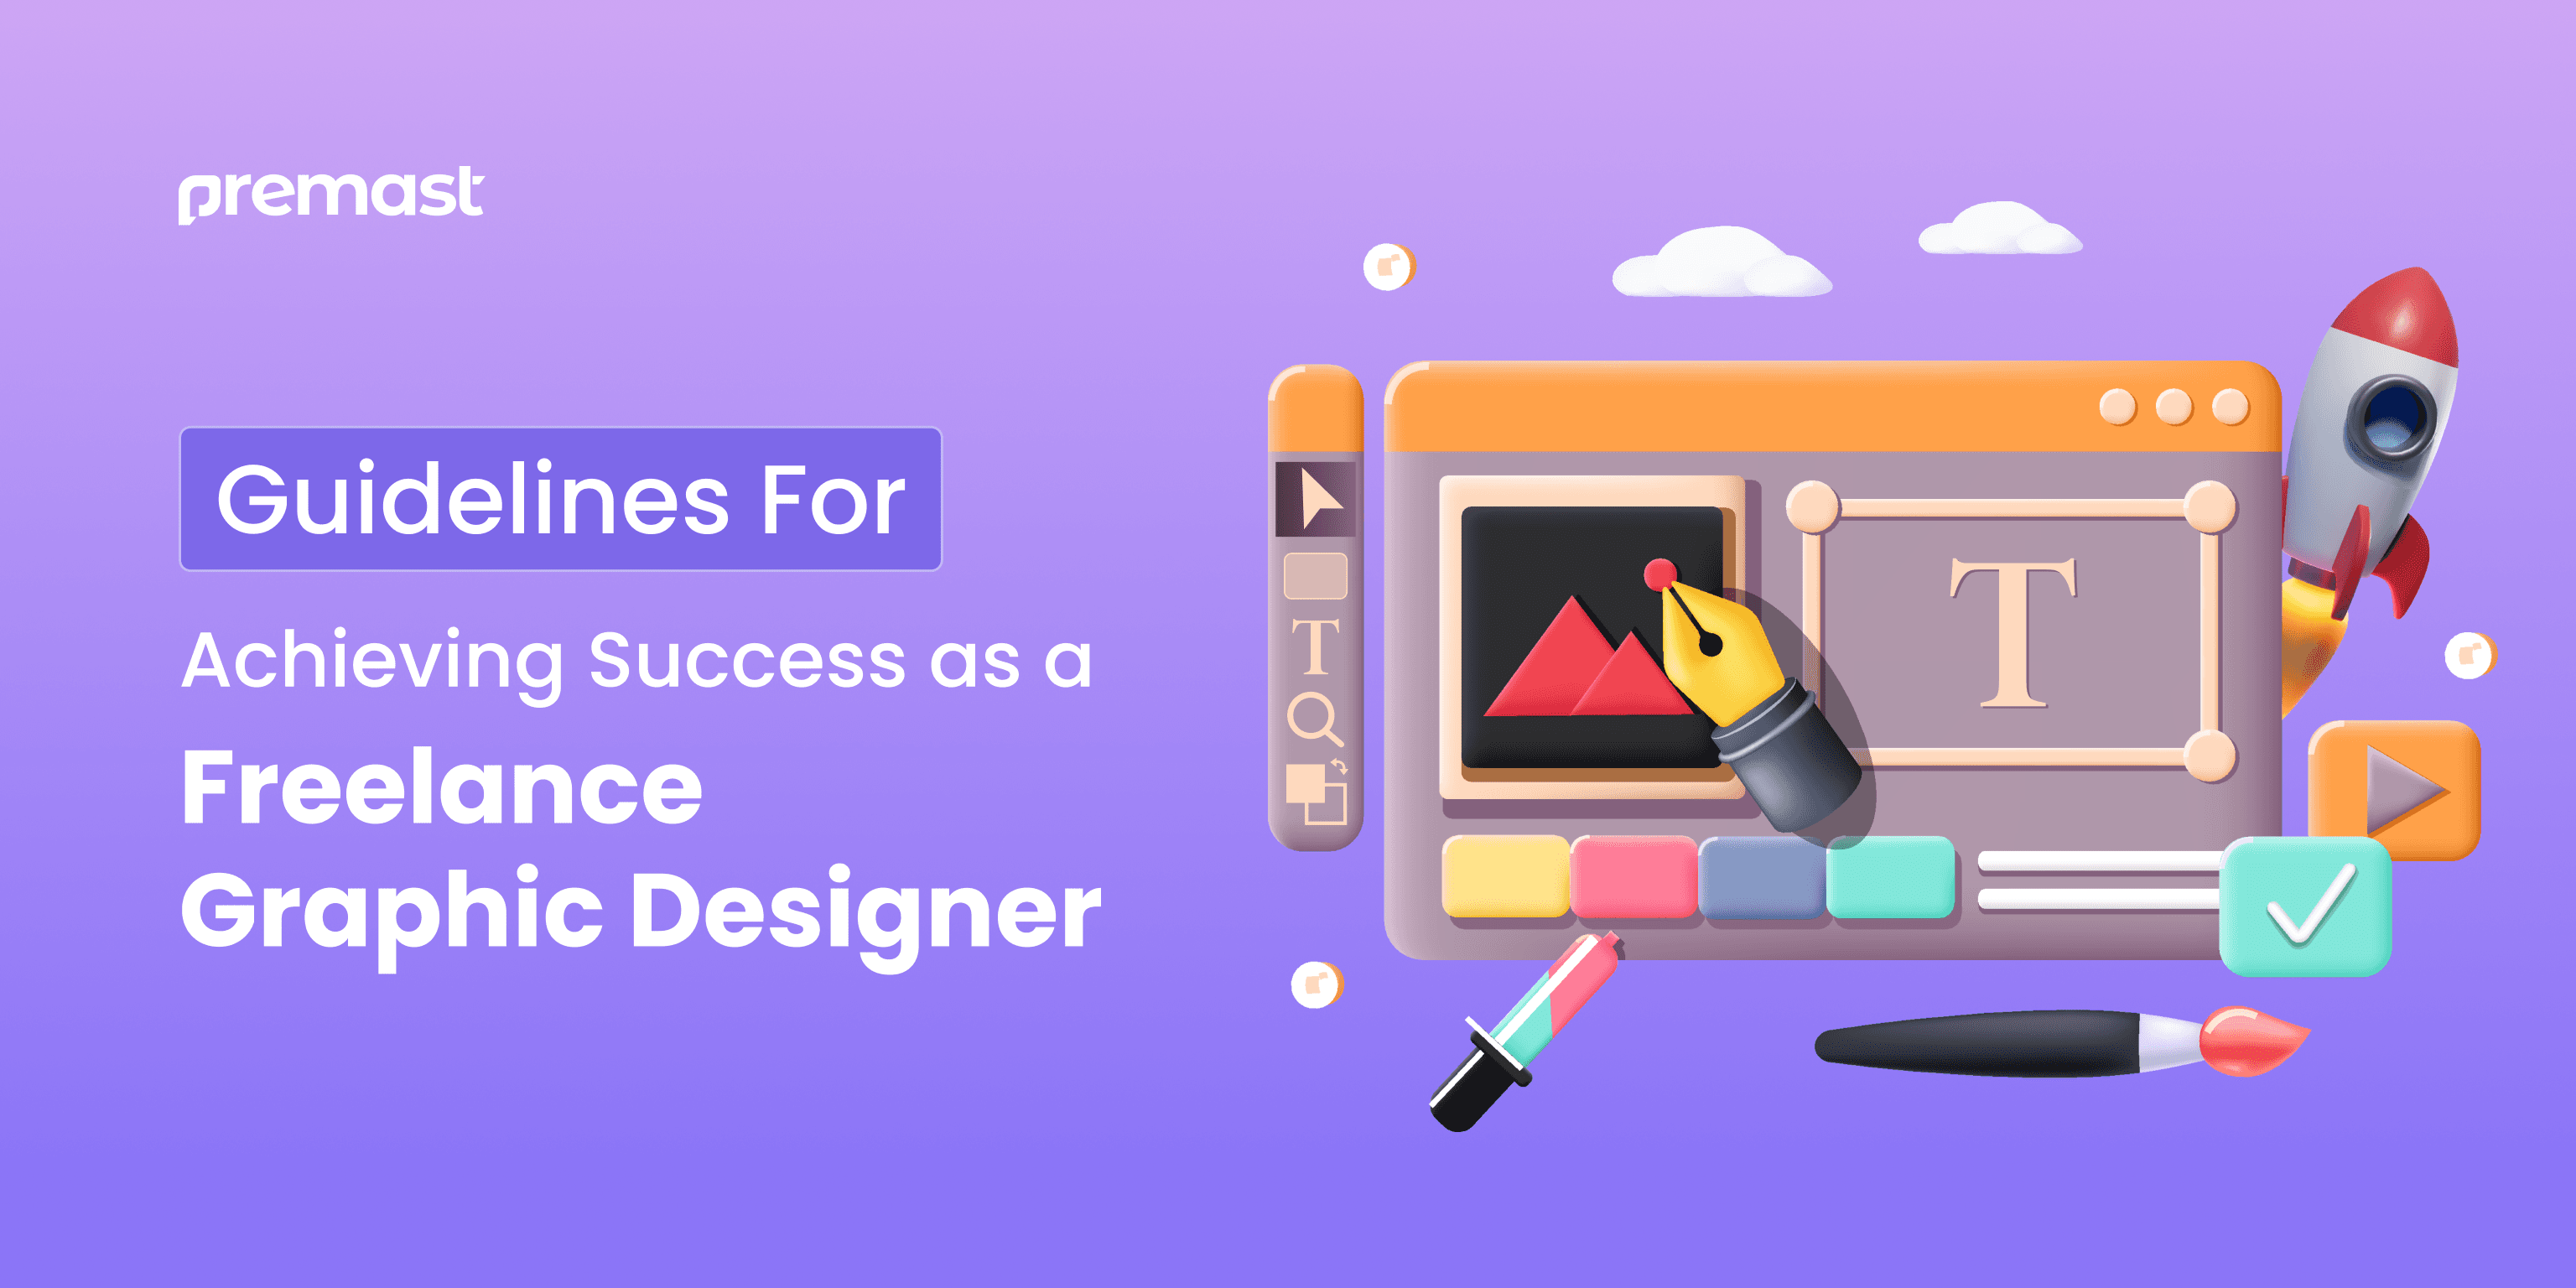 Guidelines for Achieving Success as a Freelance Graphic Designer.